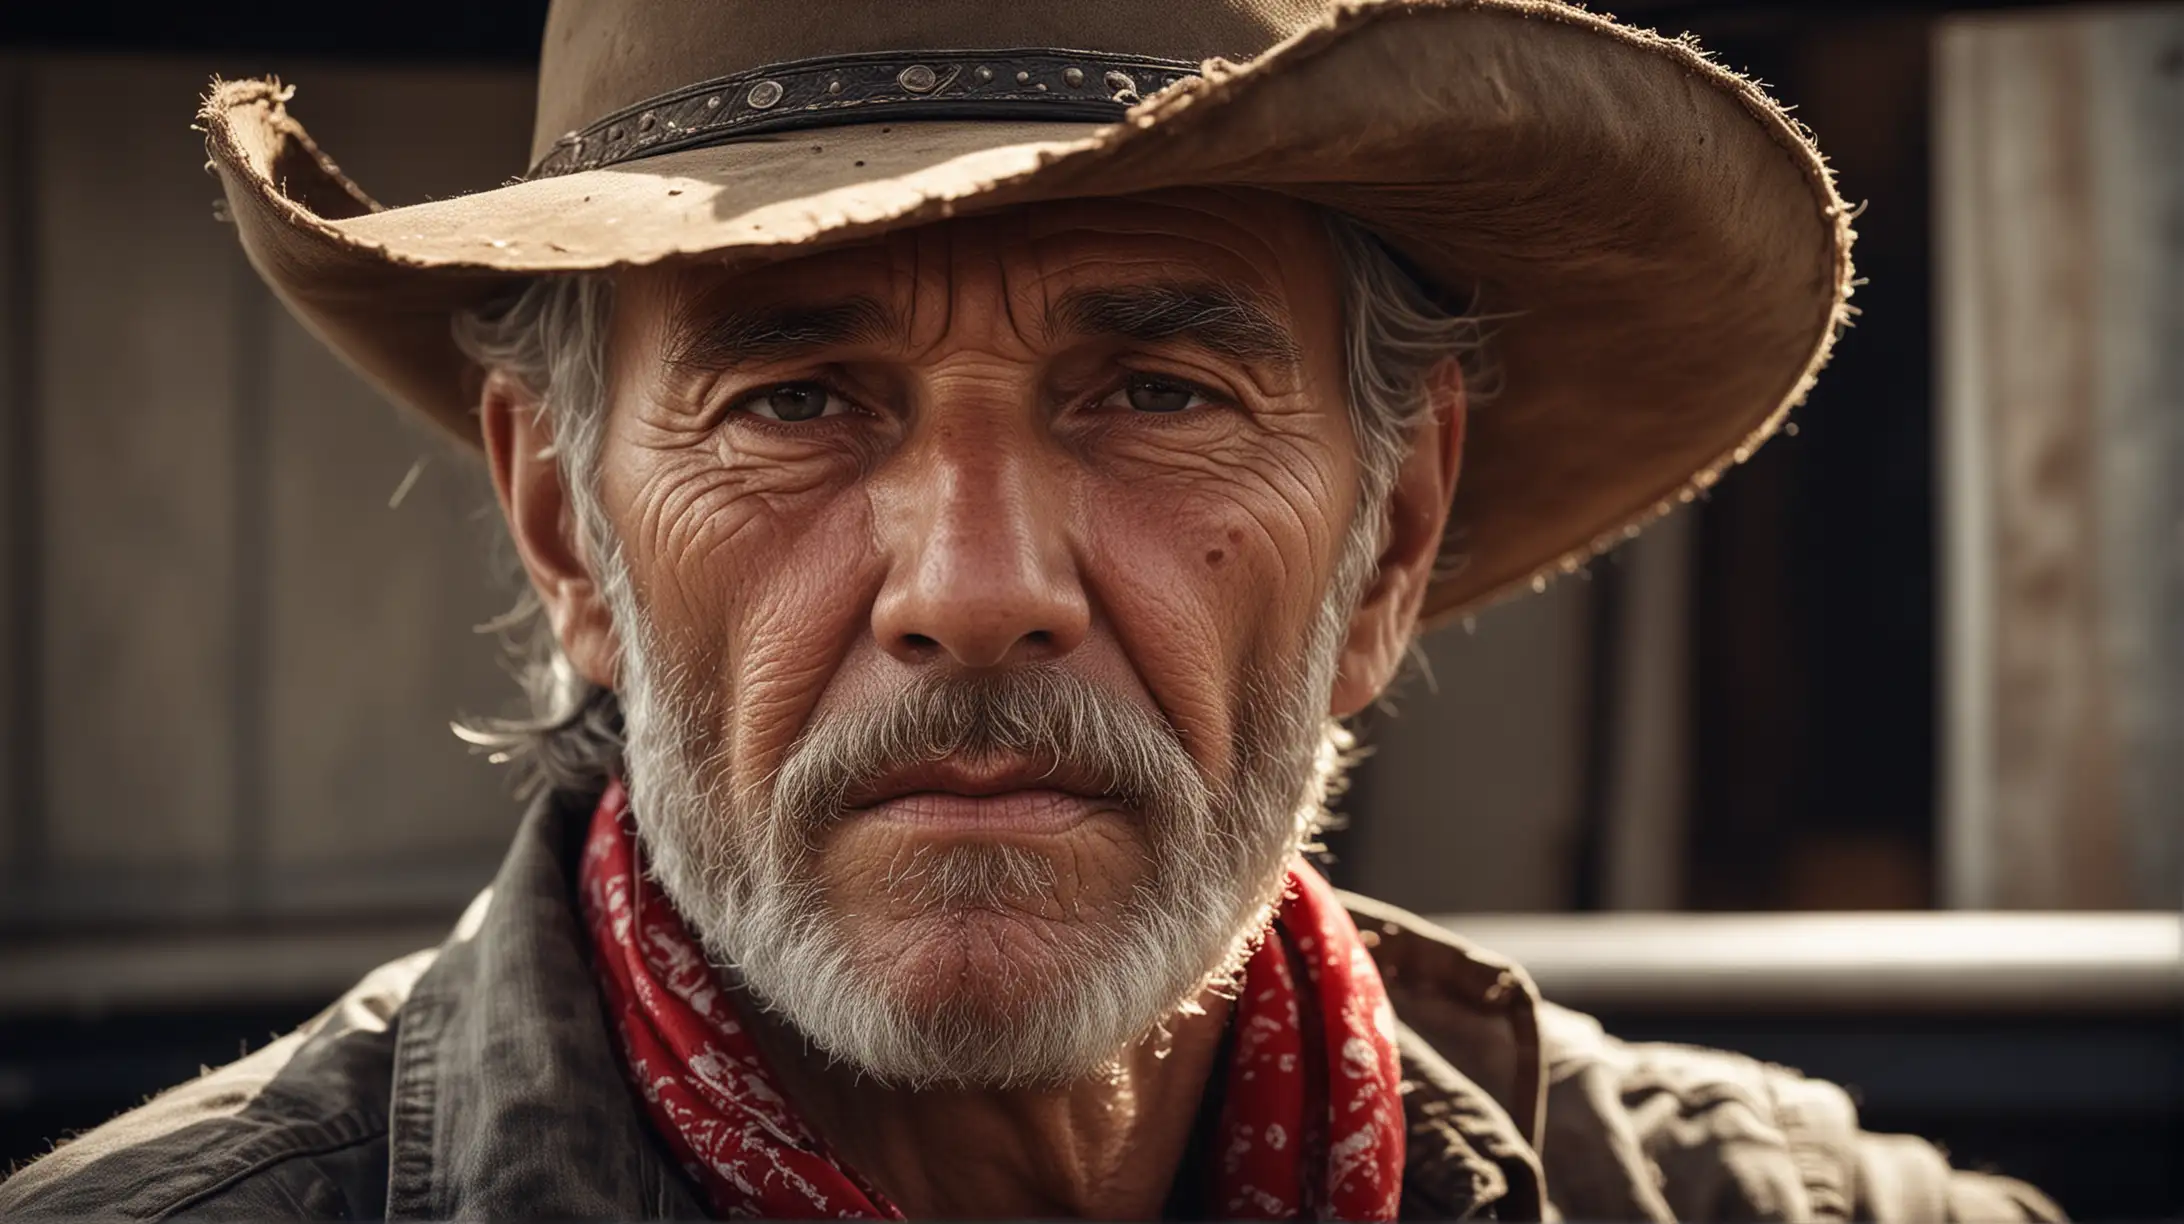 Aged Truck Driver with Tattered Cowboy Hat and Red Bandana in Cinematic CloseUp Portrait